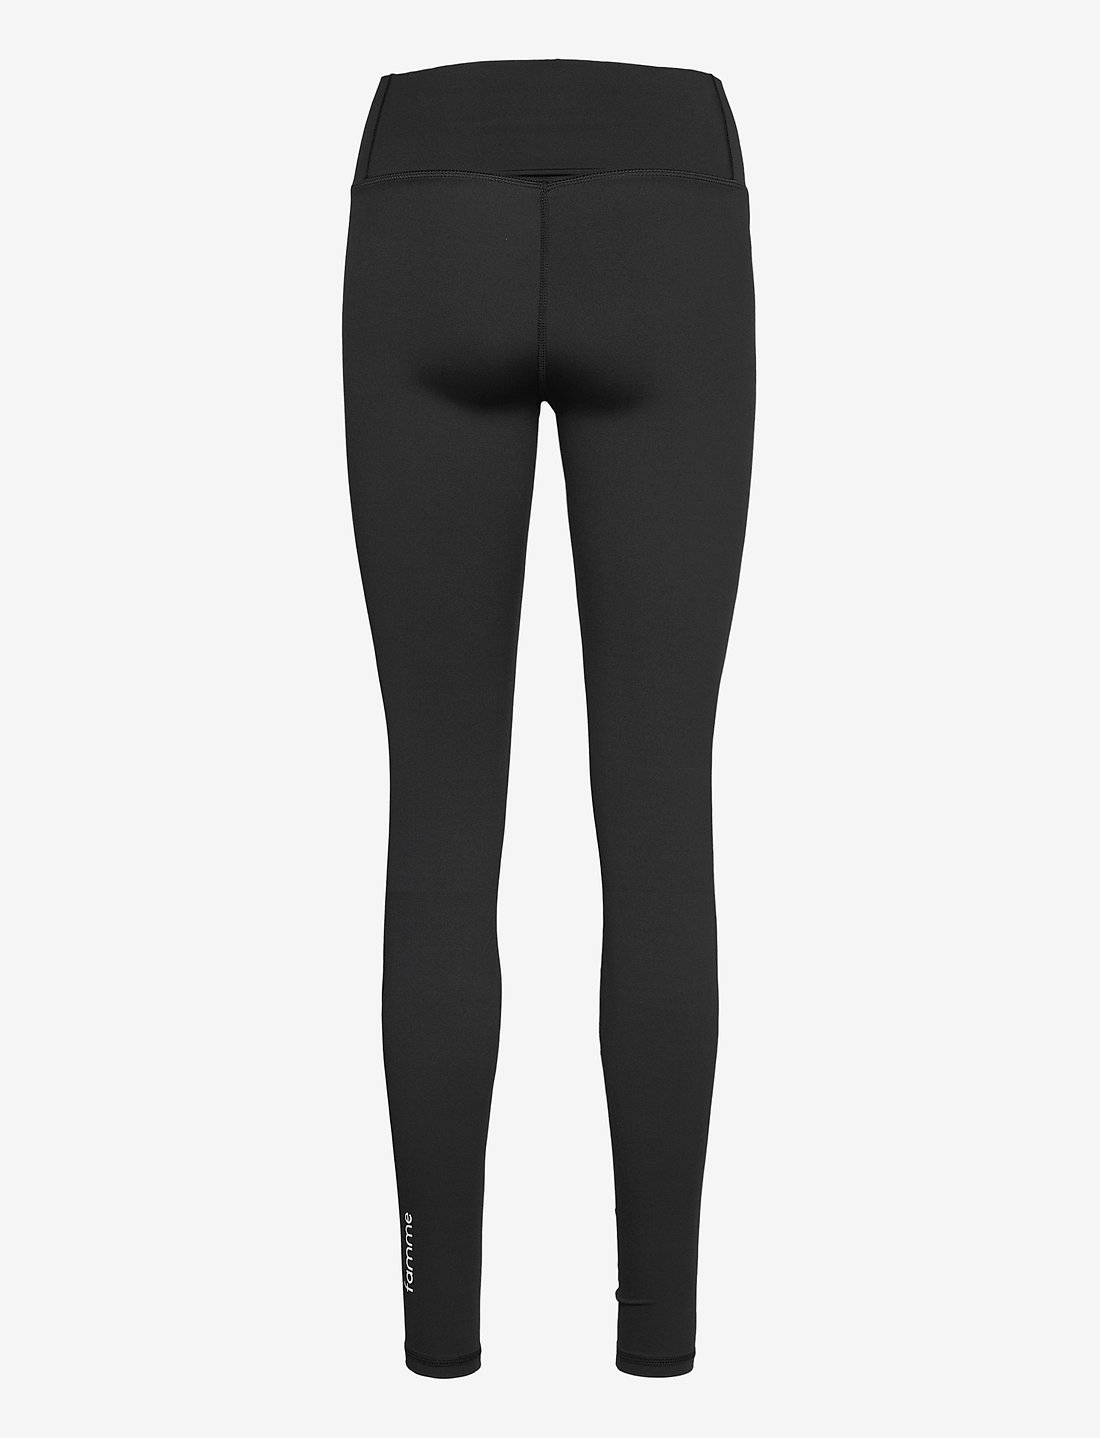 Famme Essential Tights - Leggings & Tights